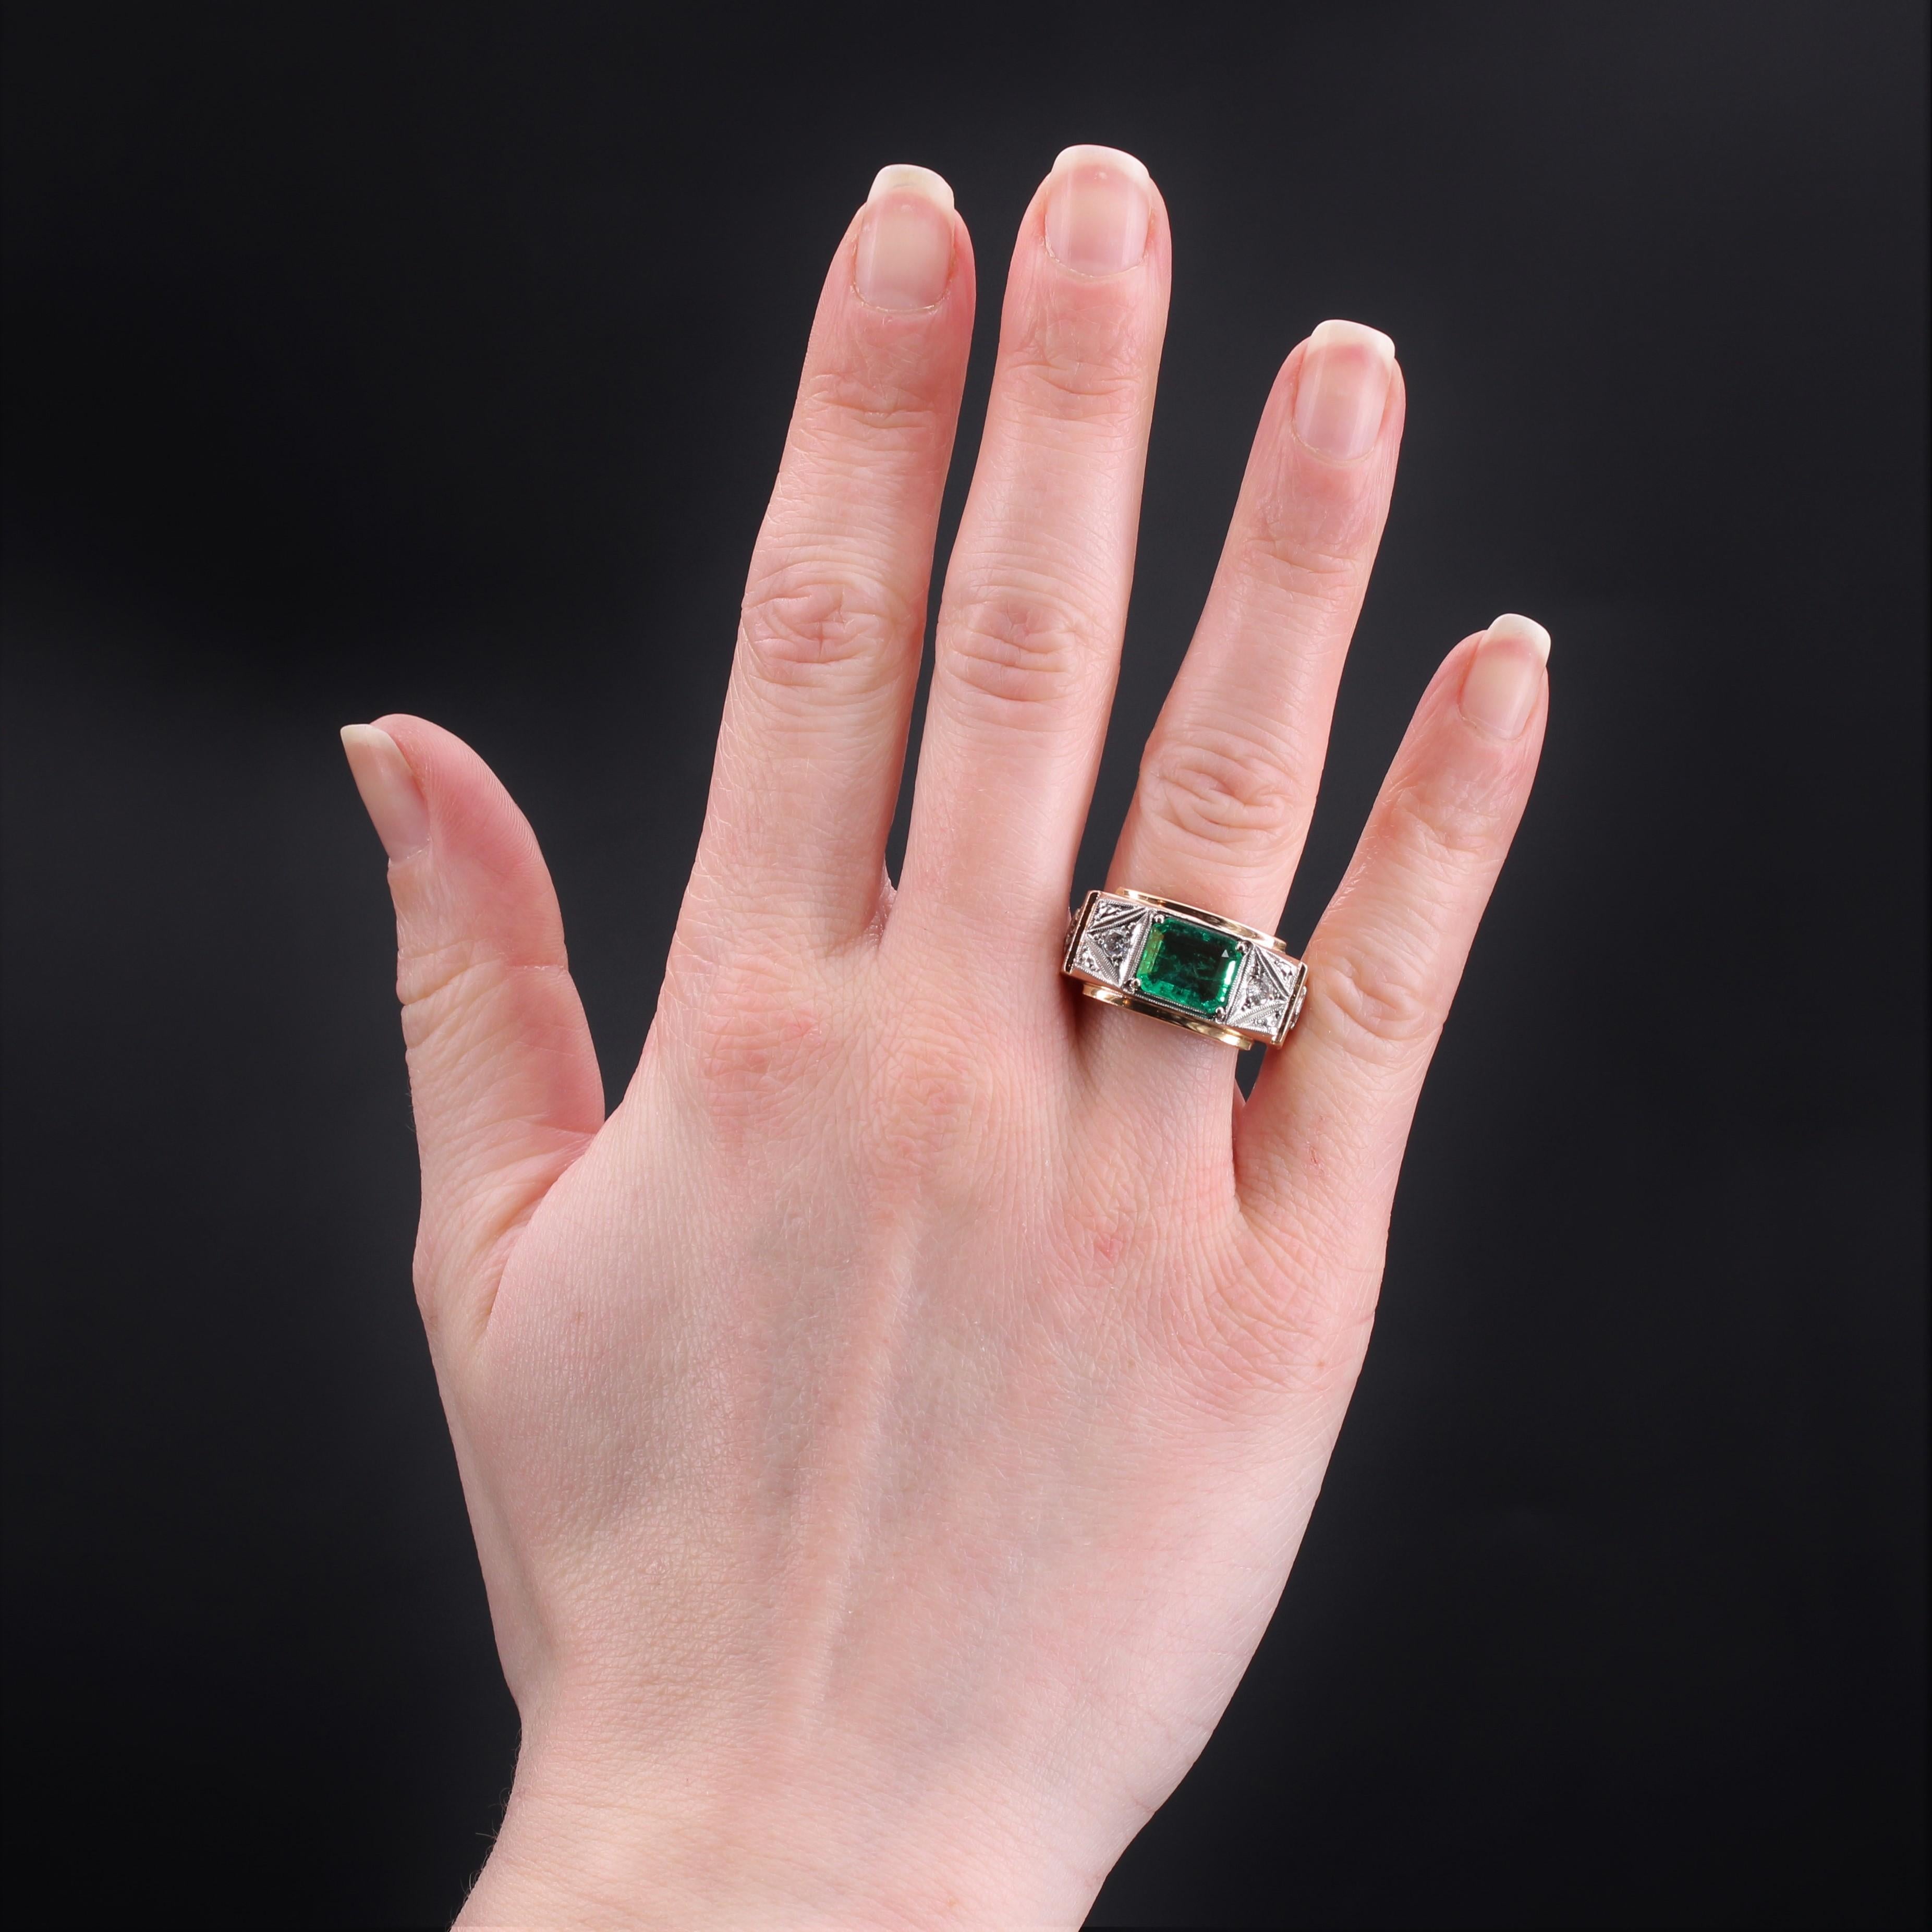 Ring in 18 karat rose gold, owl hallmark and platinum, mascaron hallmark.
Sublime ring with geometrical lines, it is set on its top with an emerald held in 4 claws shouldered on both sides of a chiseled arrowhead pattern set each with a modern